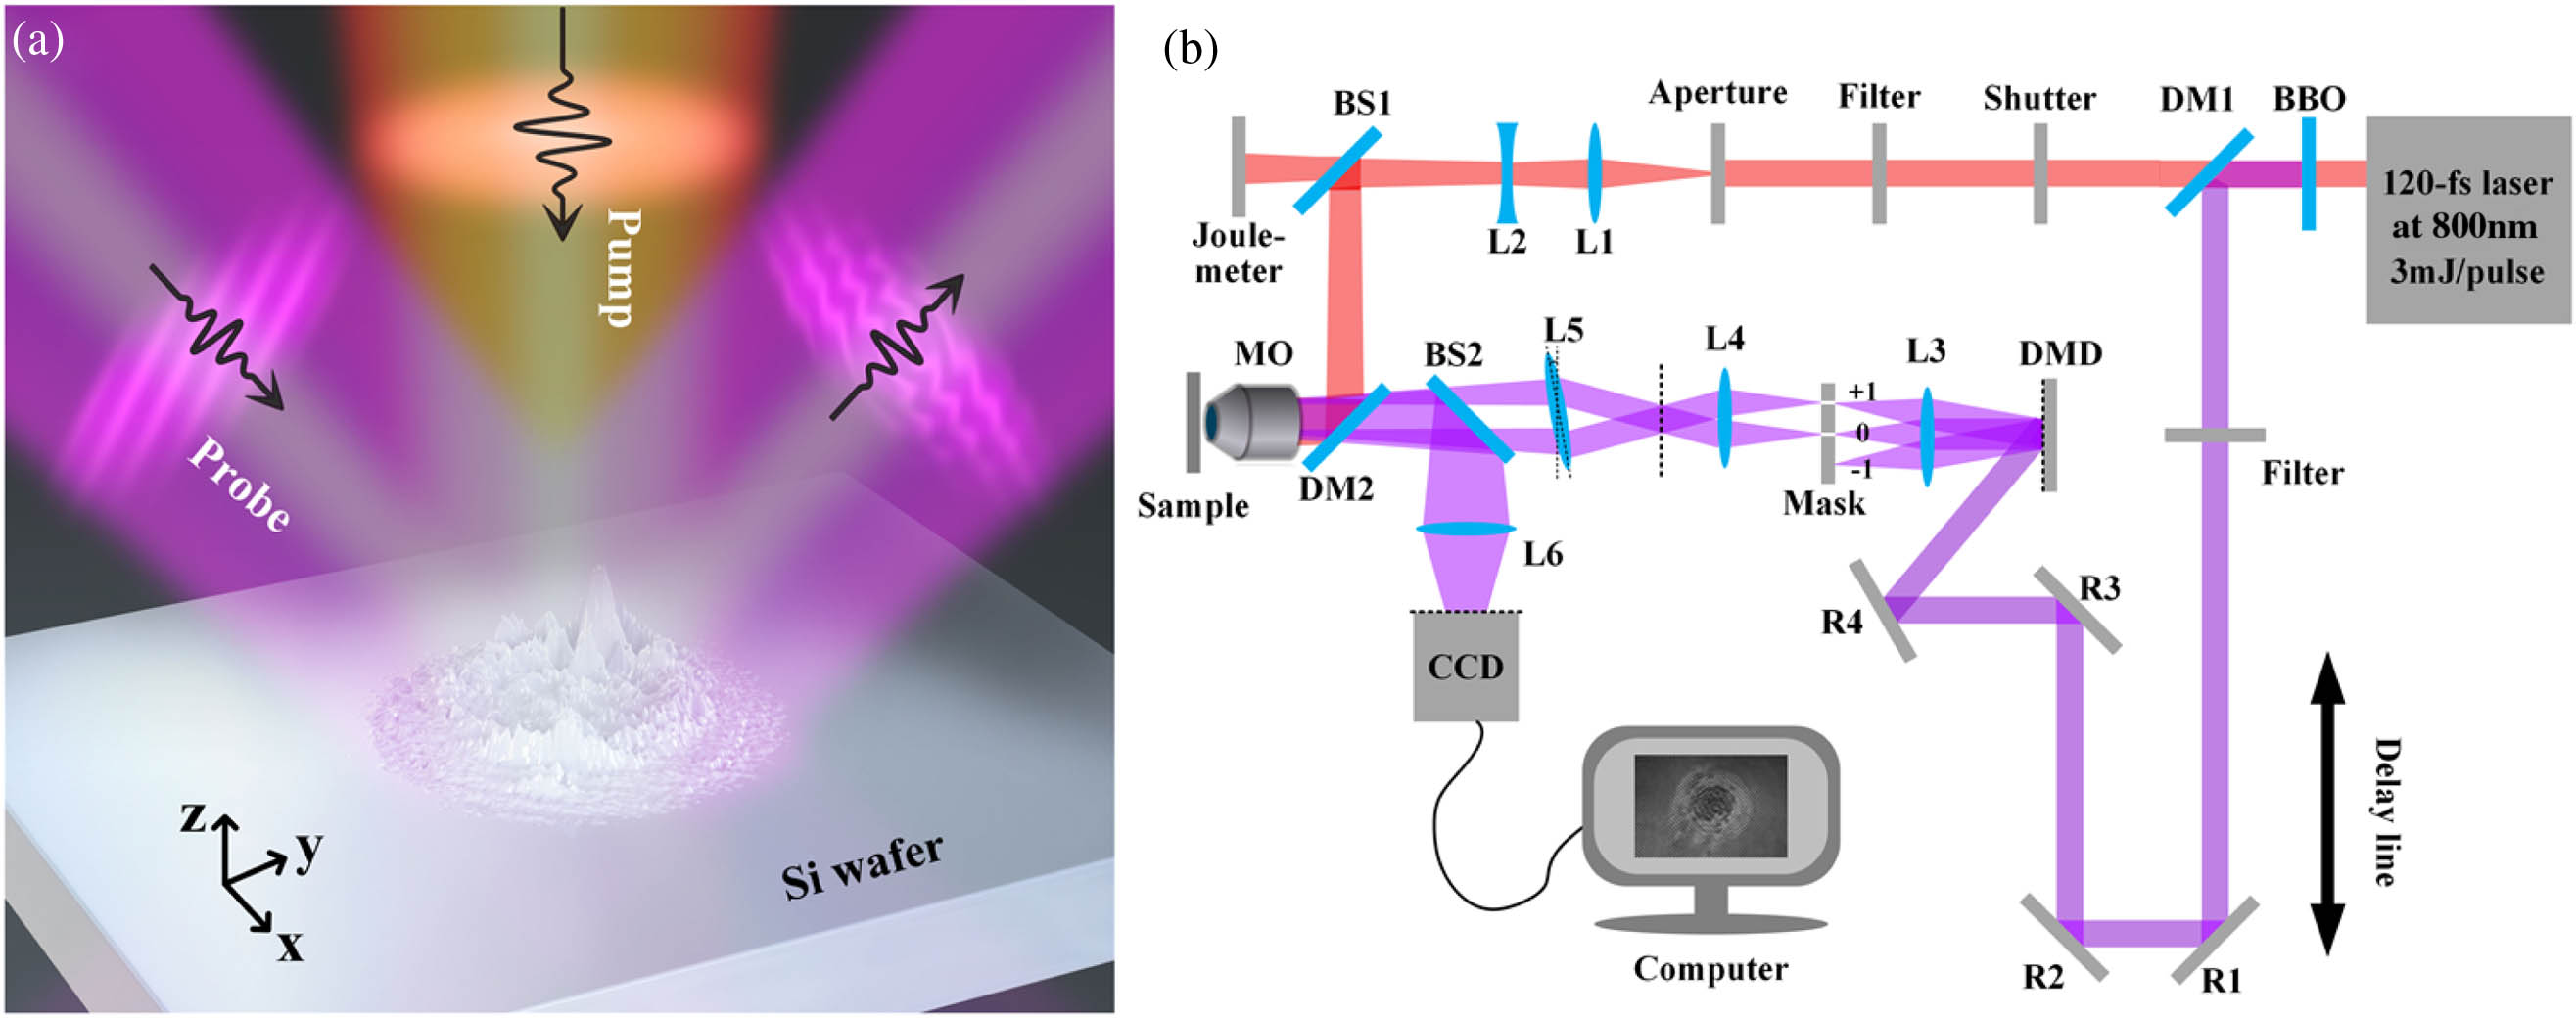 Schematic of the SPSLM, where red and violet indicate pump light (at 800 nm) and probe light (at 400 nm), respectively. (a) Diagram of ultrafast pulses on Si wafer. (b) Optical path of SPSLM: BBO, barium boron oxide; DM1, DM2, dichroic mirrors; L1–L6, lenses; R1–R5, reflectors; BS1, BS2, beam splitters; DMD, digital mirror device; CCD, charge-coupled device; MO, microscope objective (100×, apochromatic, NA=0.9).